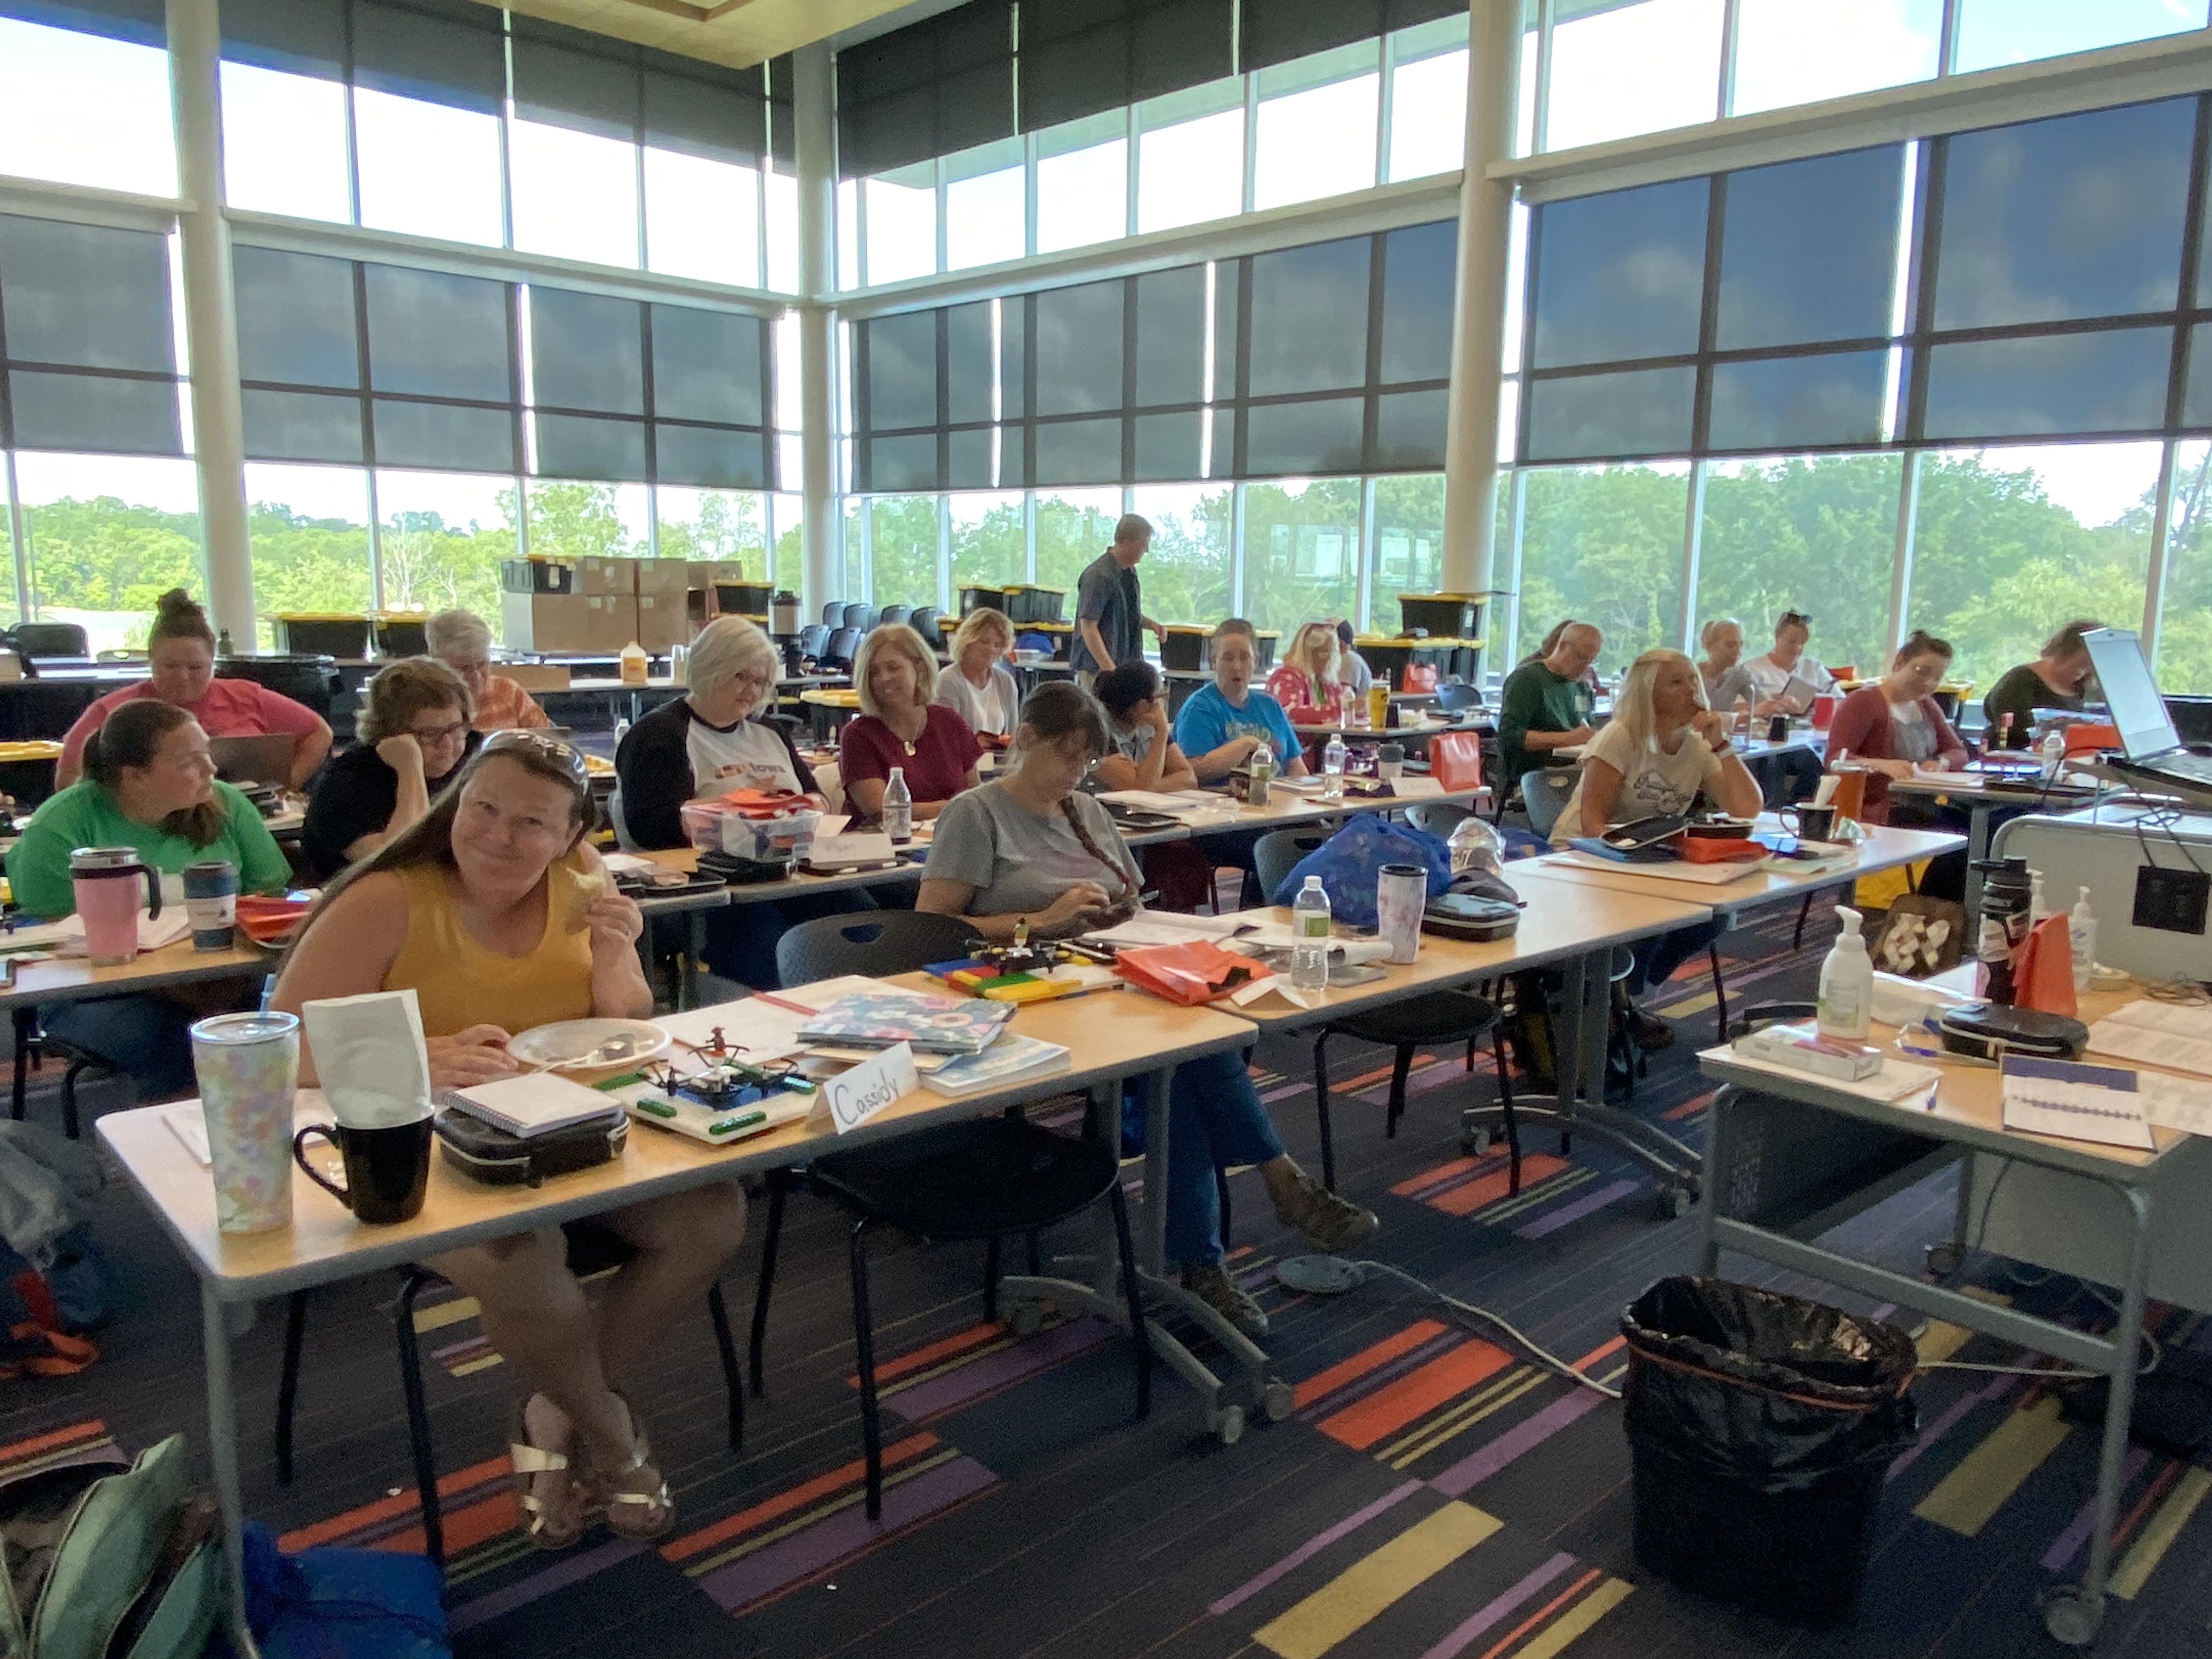 Educators took part in training for the 2022-2023 STEM Scale-Up Program Ready, Set, Drone. Scale-Up training for the coming academic is set to begin in July.